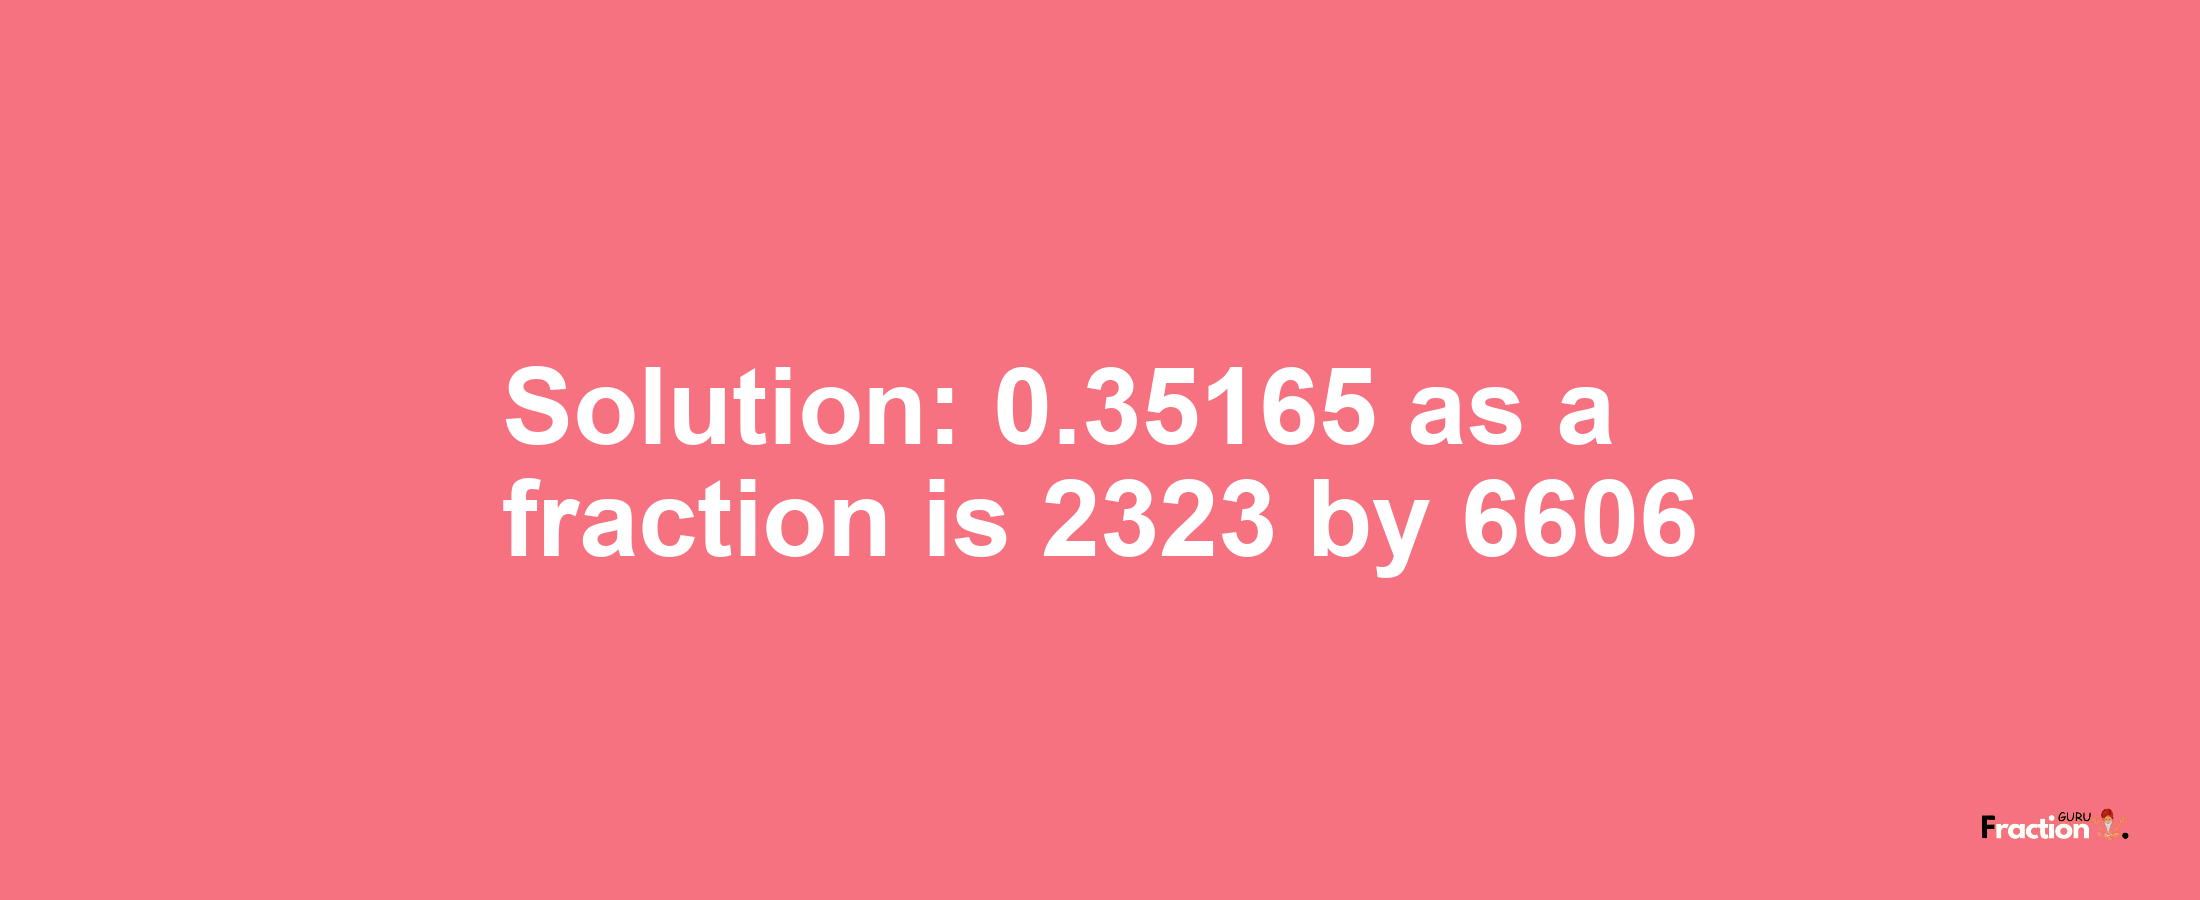 Solution:0.35165 as a fraction is 2323/6606